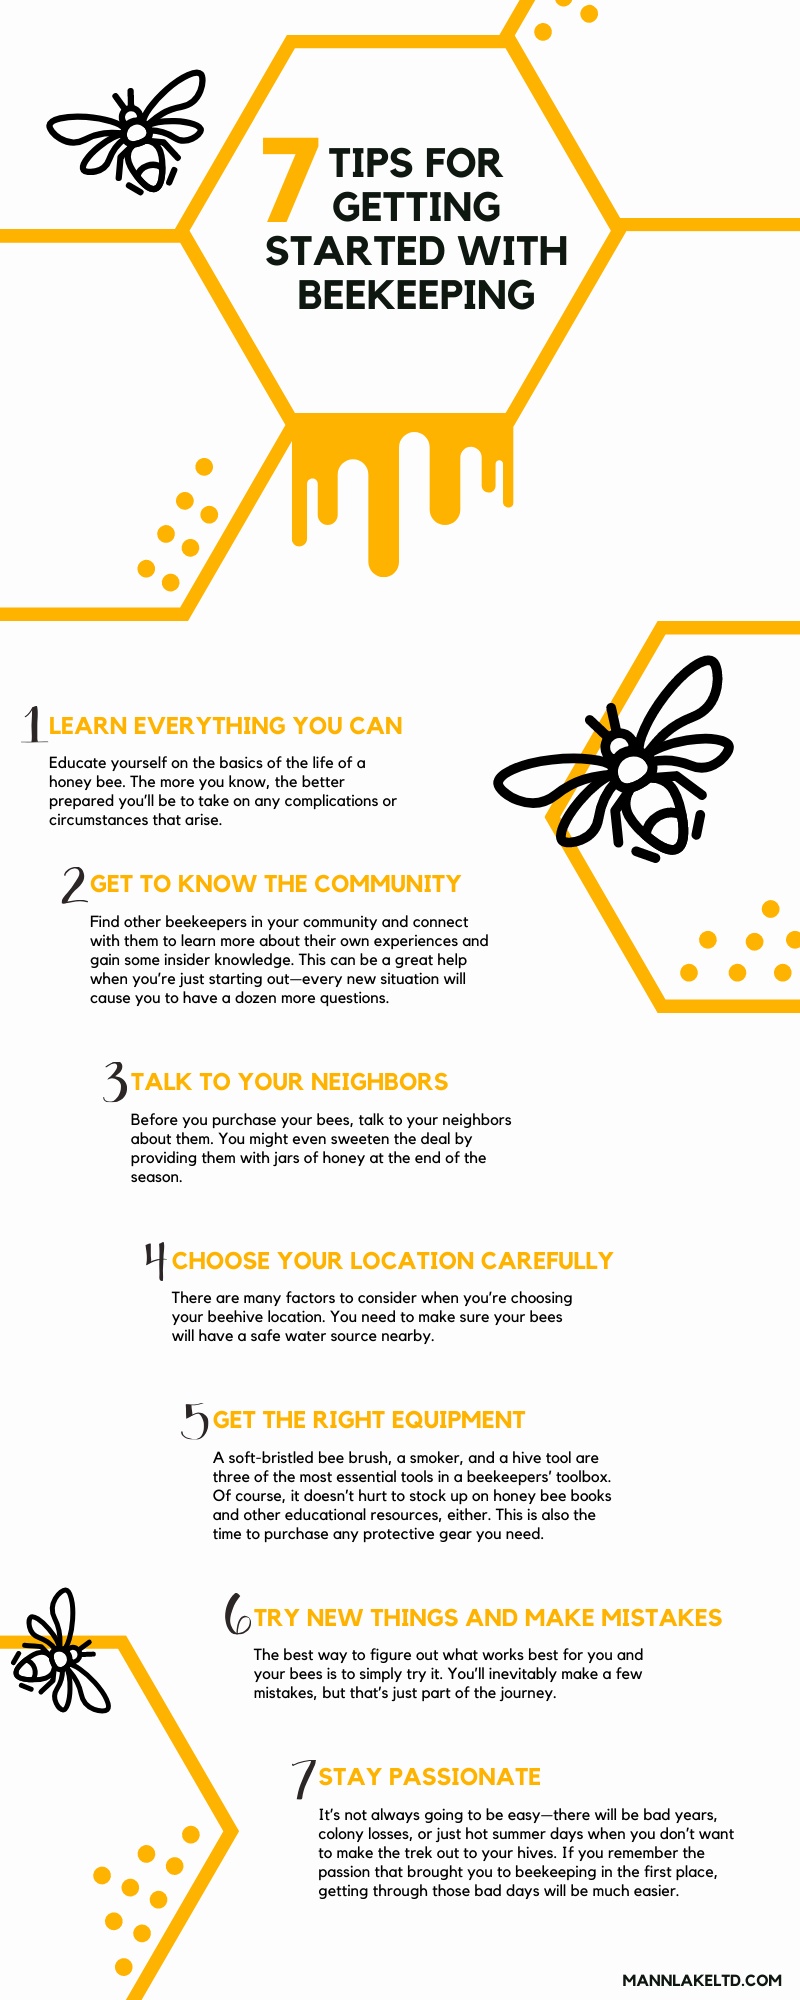 7 Tips For Getting Started With Beekeeping - Mann Lake Bee & Ag Supply